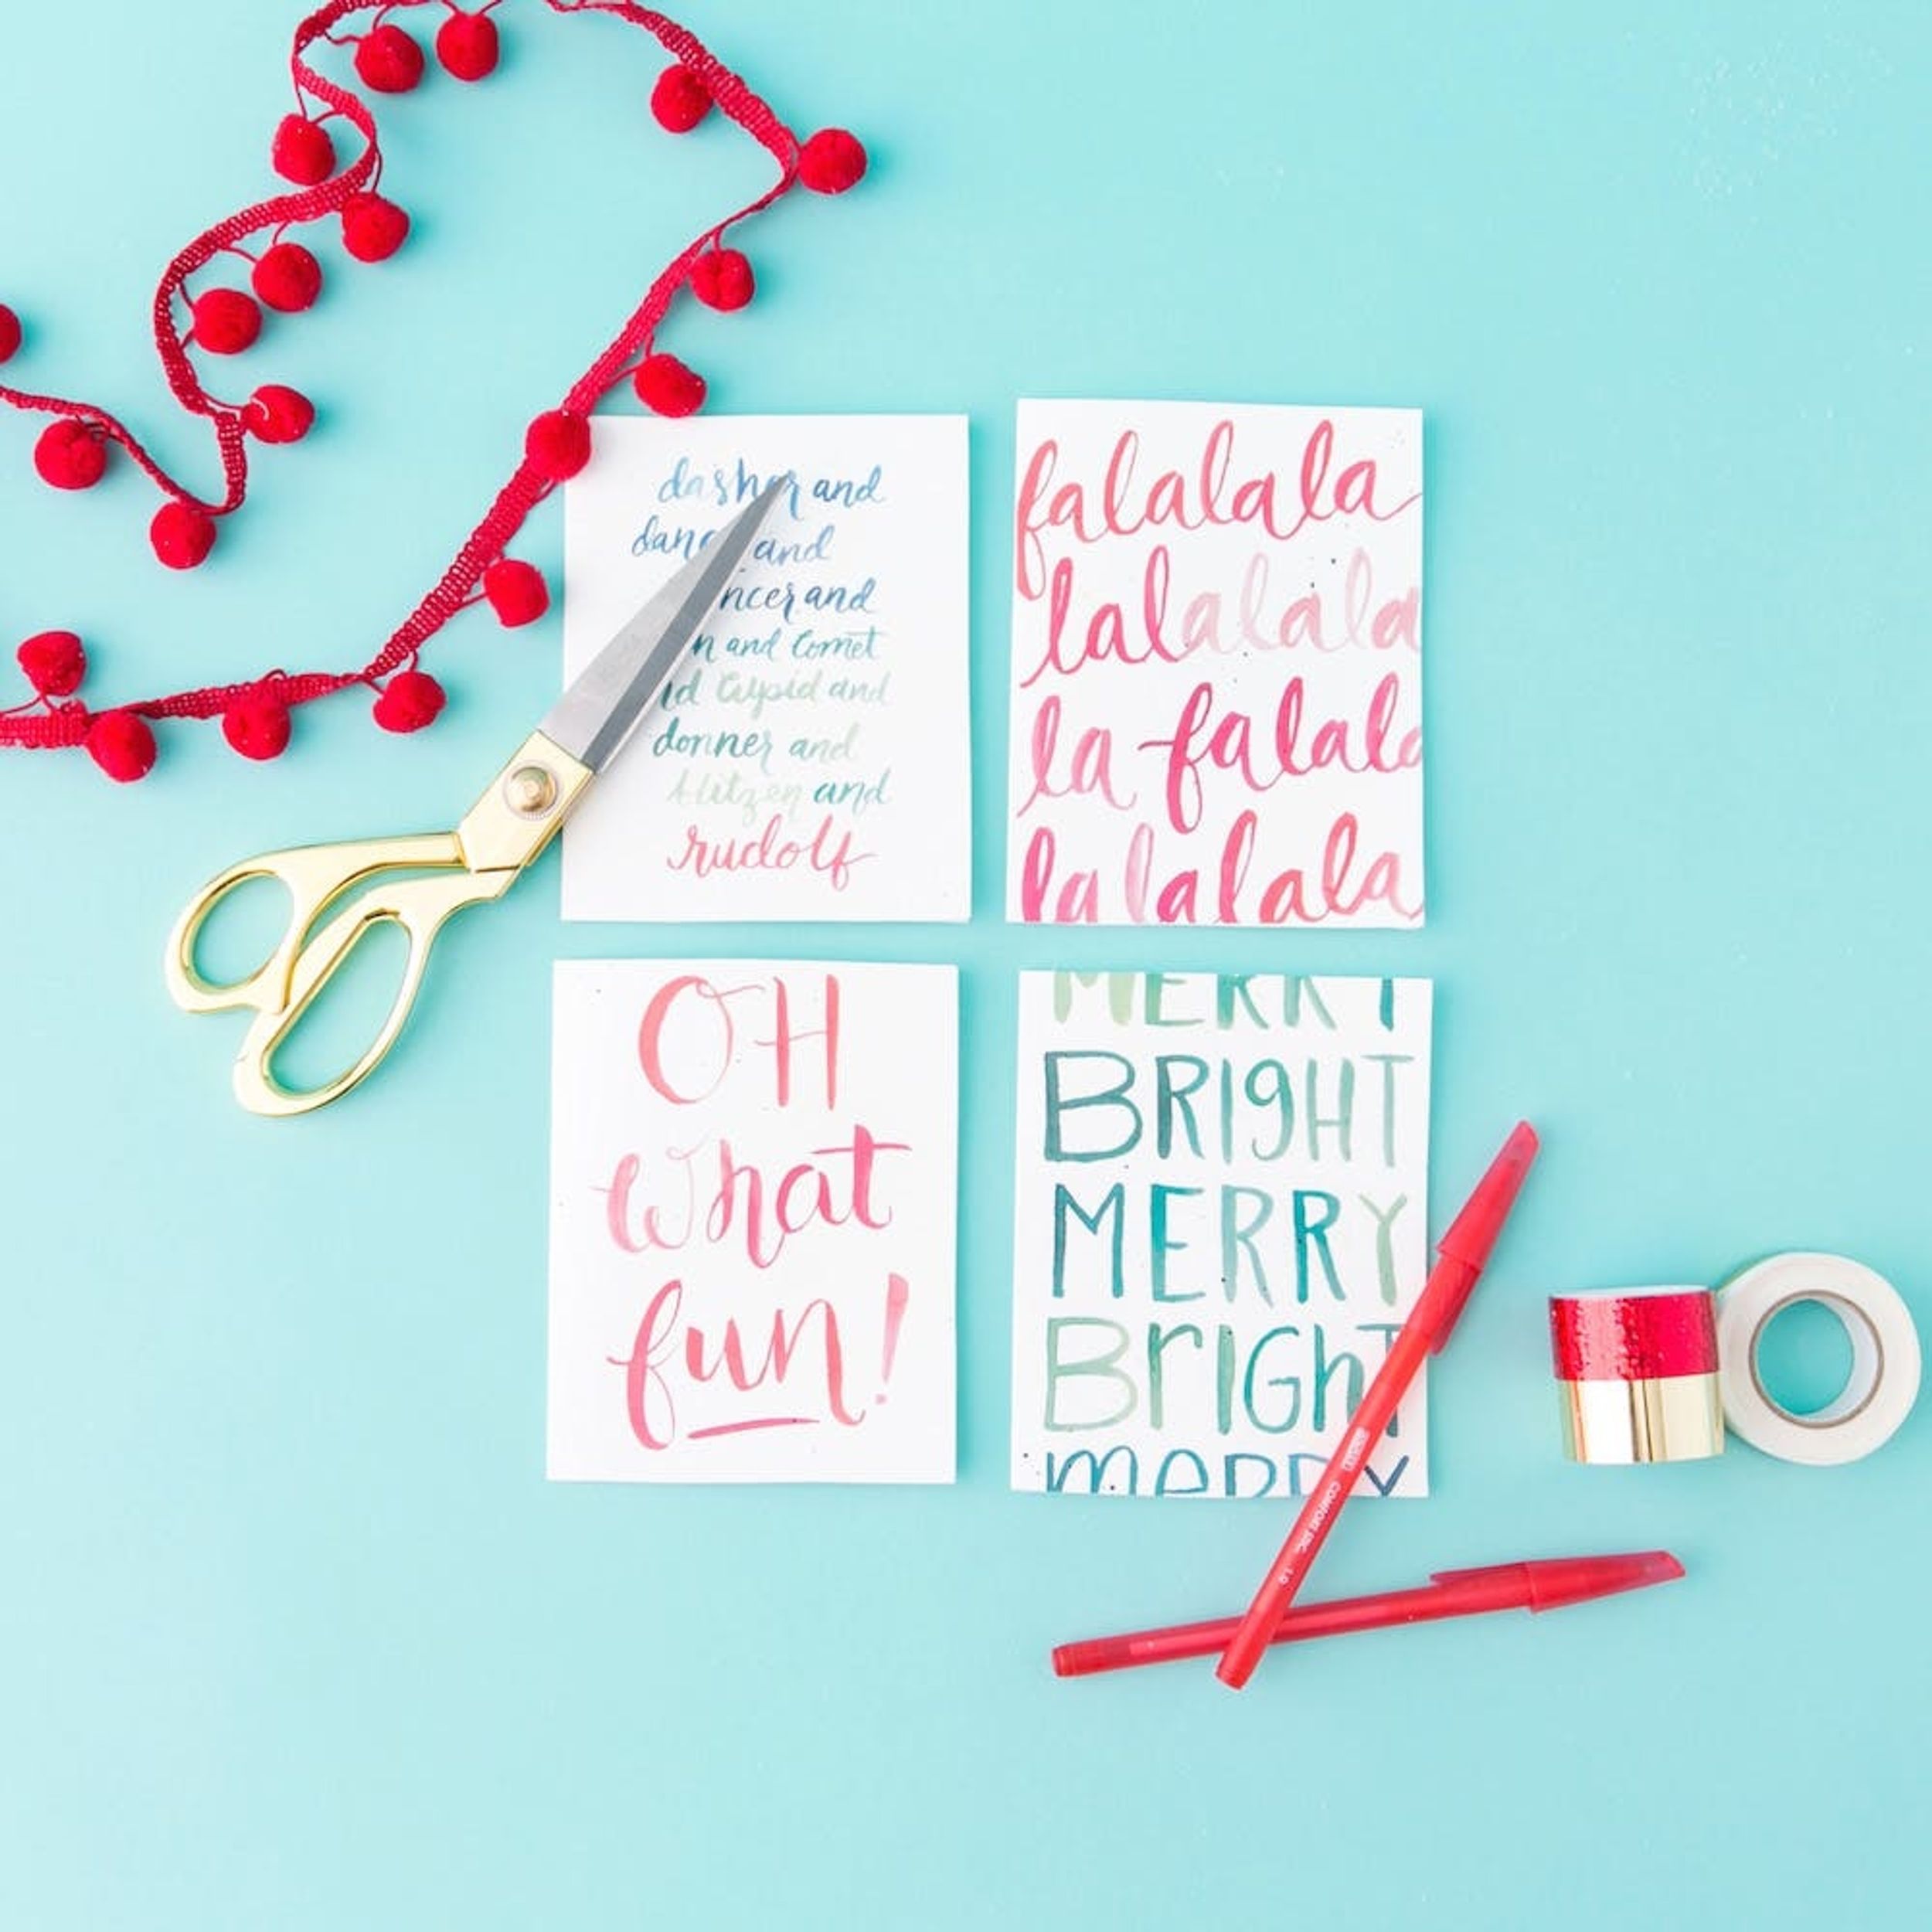 Free Printable Friday: Festive Hand-Lettered Holiday Cards